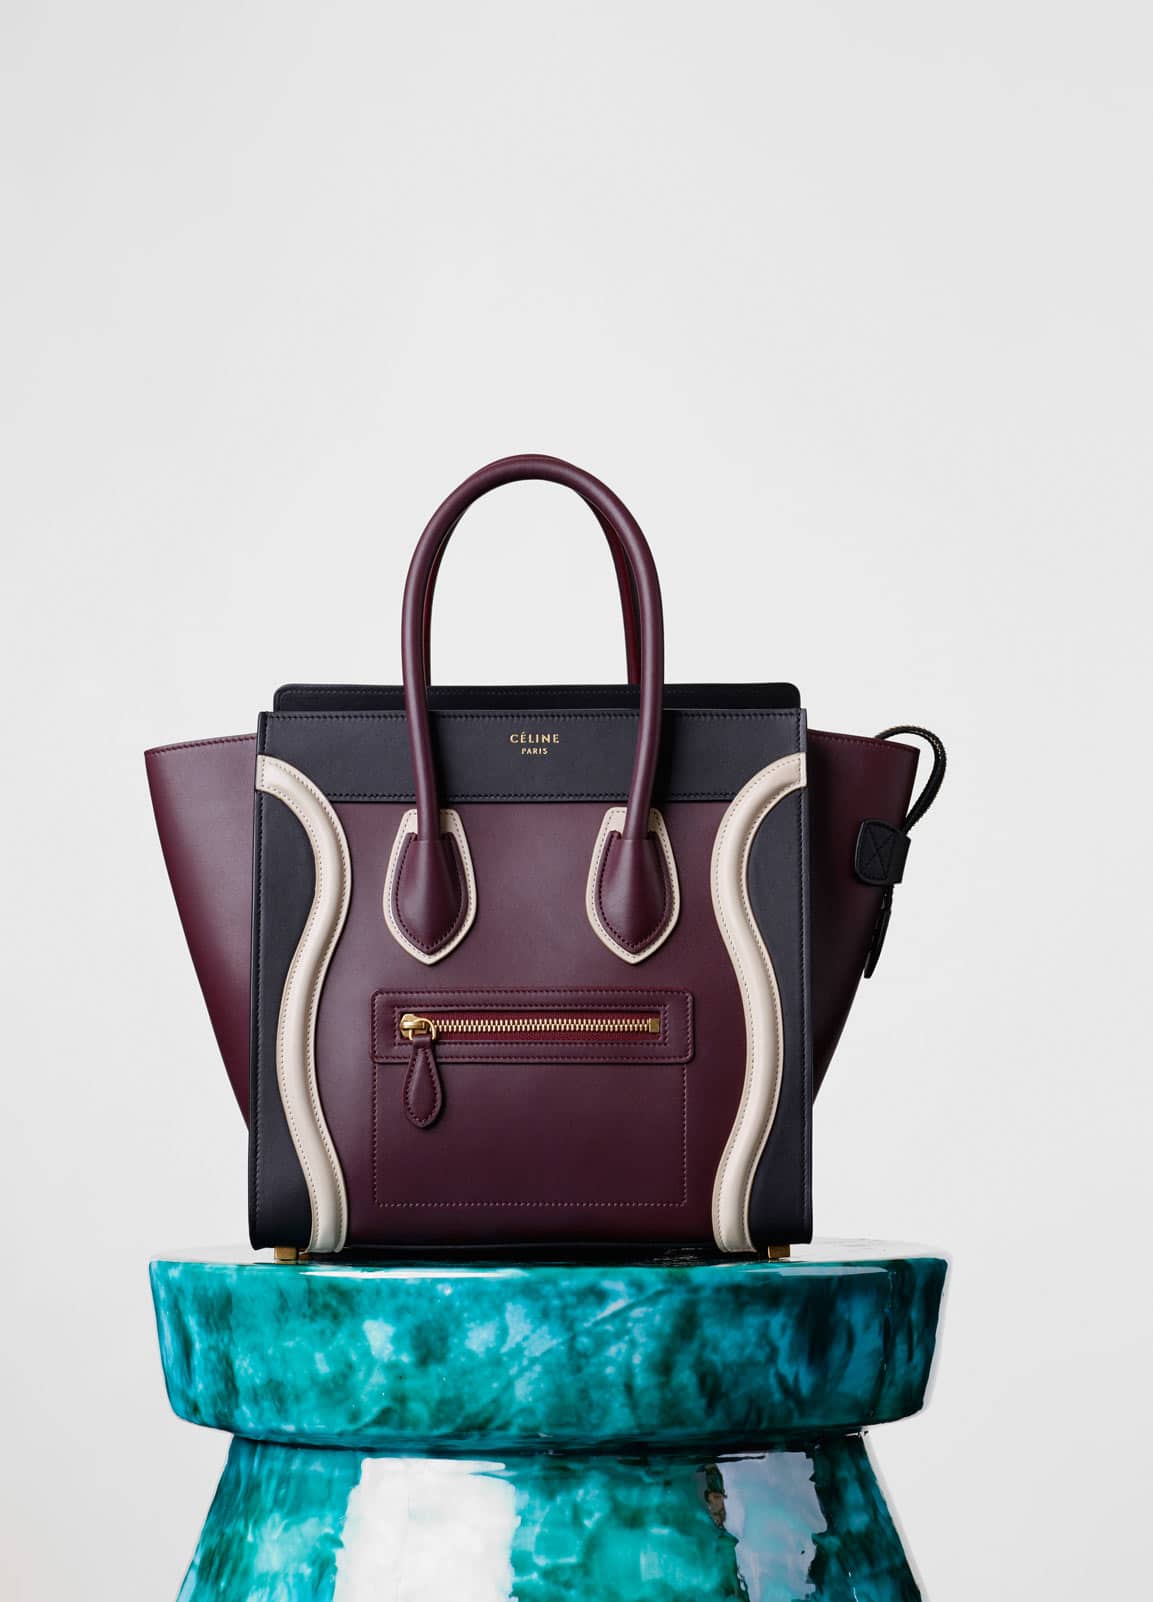 Celine Winter 2015 Bag Collection Featuring Subtropical Shades and ...  